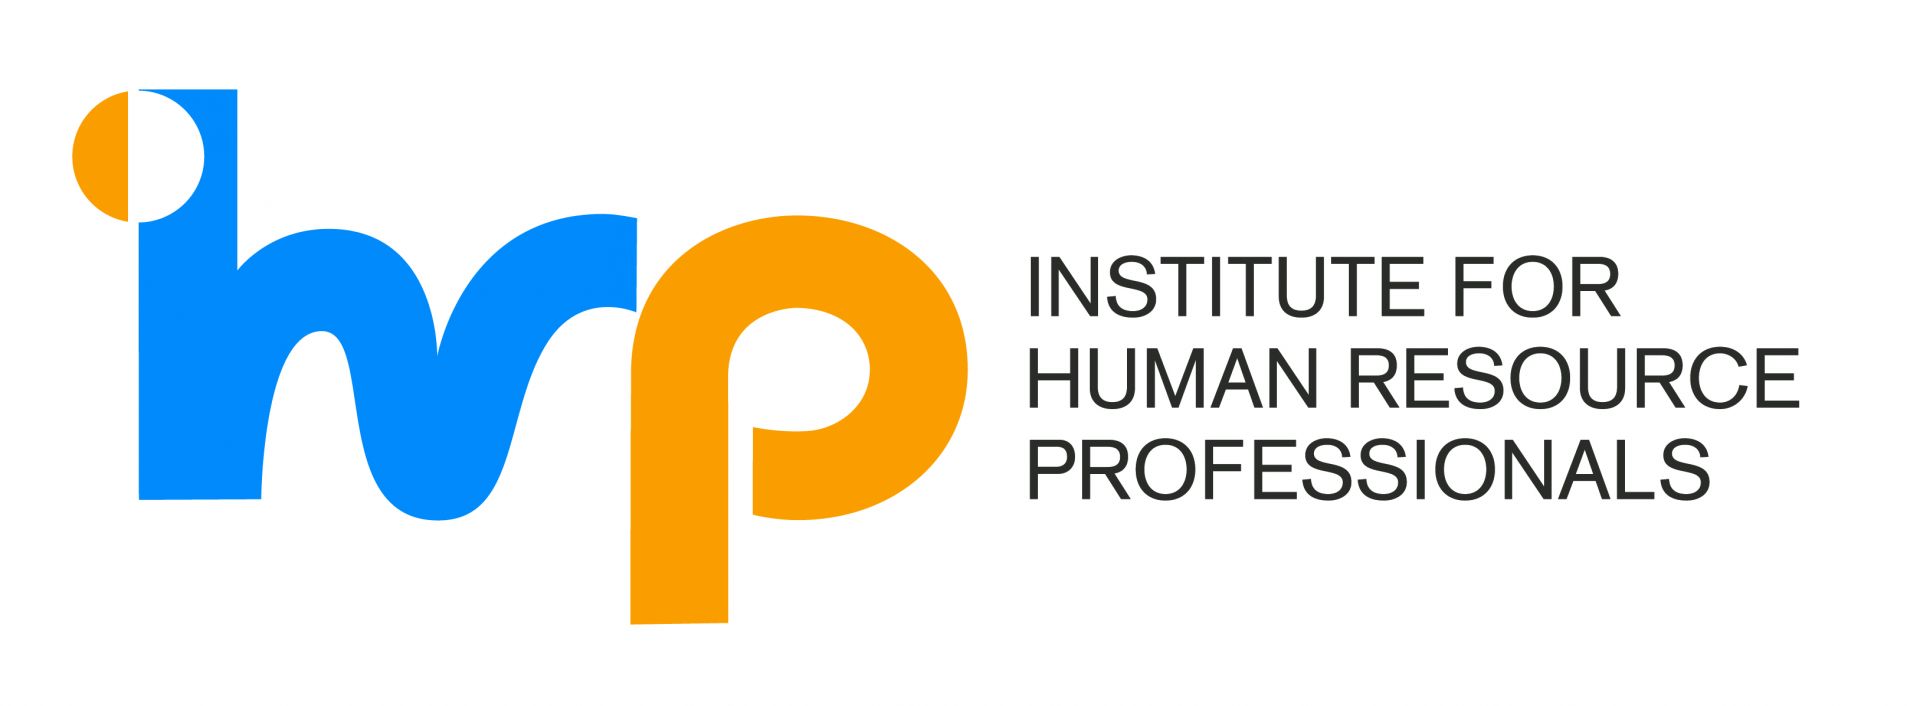 Our mission is to professionalise and strengthen the HR practice in ...